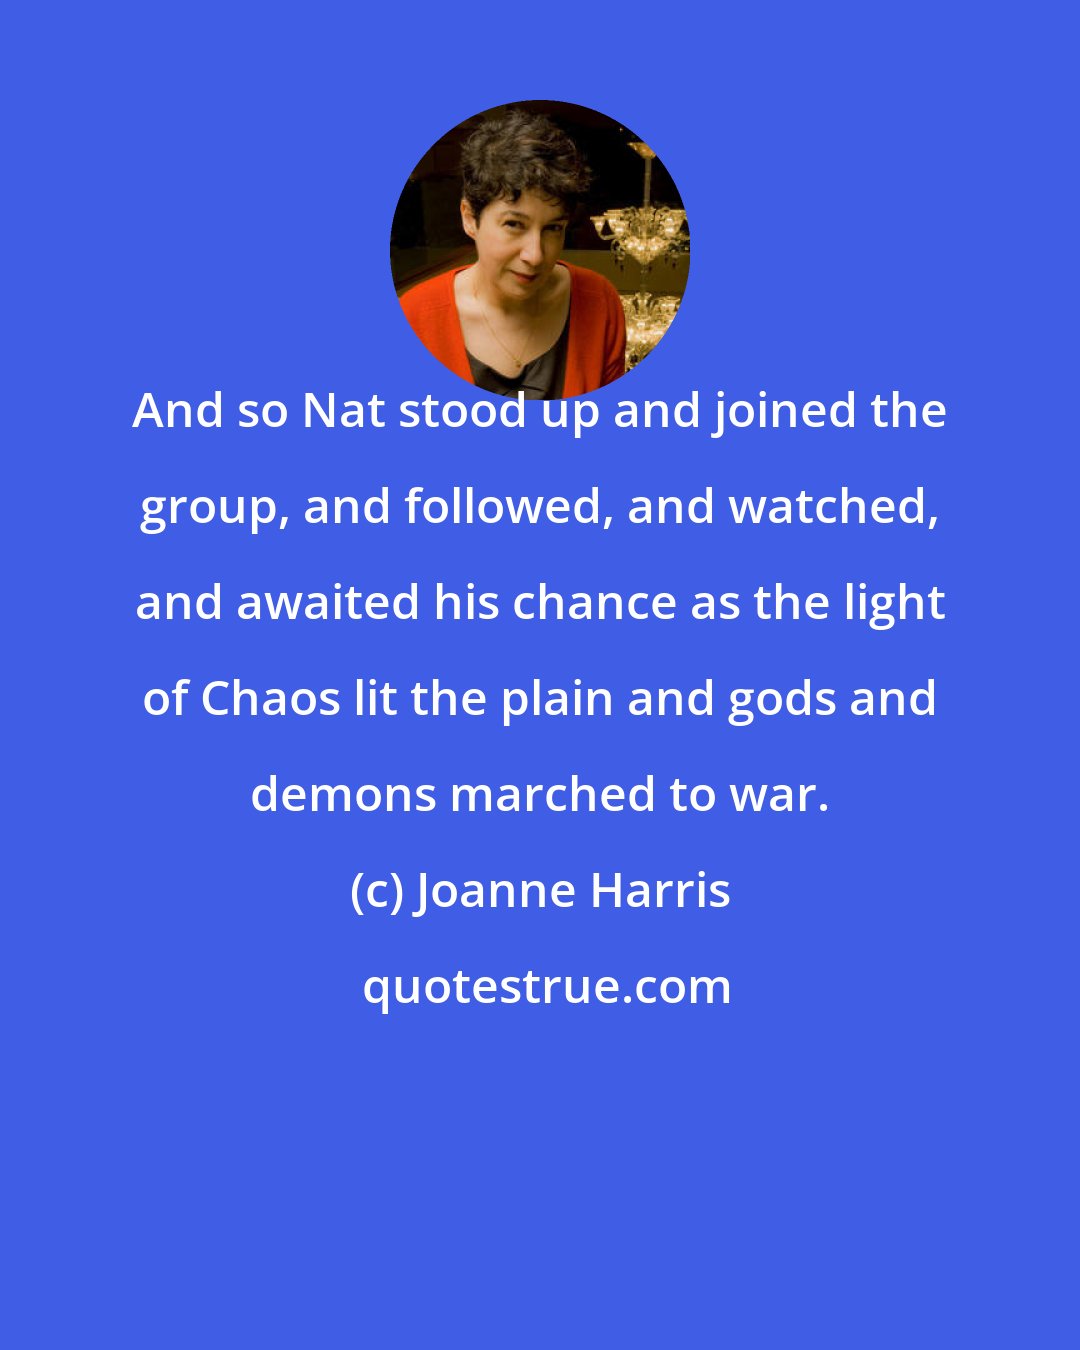 Joanne Harris: And so Nat stood up and joined the group, and followed, and watched, and awaited his chance as the light of Chaos lit the plain and gods and demons marched to war.